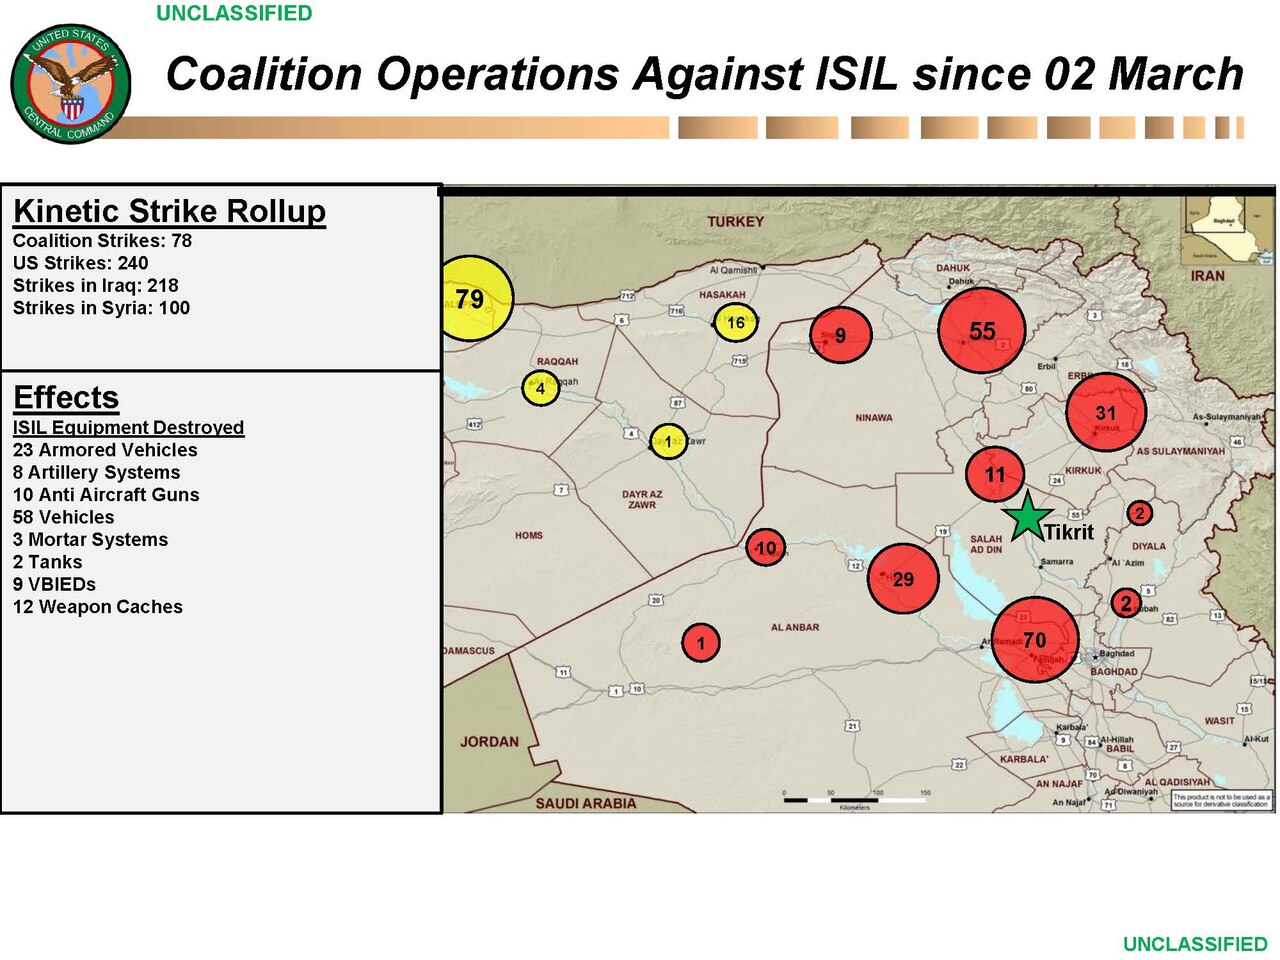 Coalition Operations Against ISIL since March 2, 2015.